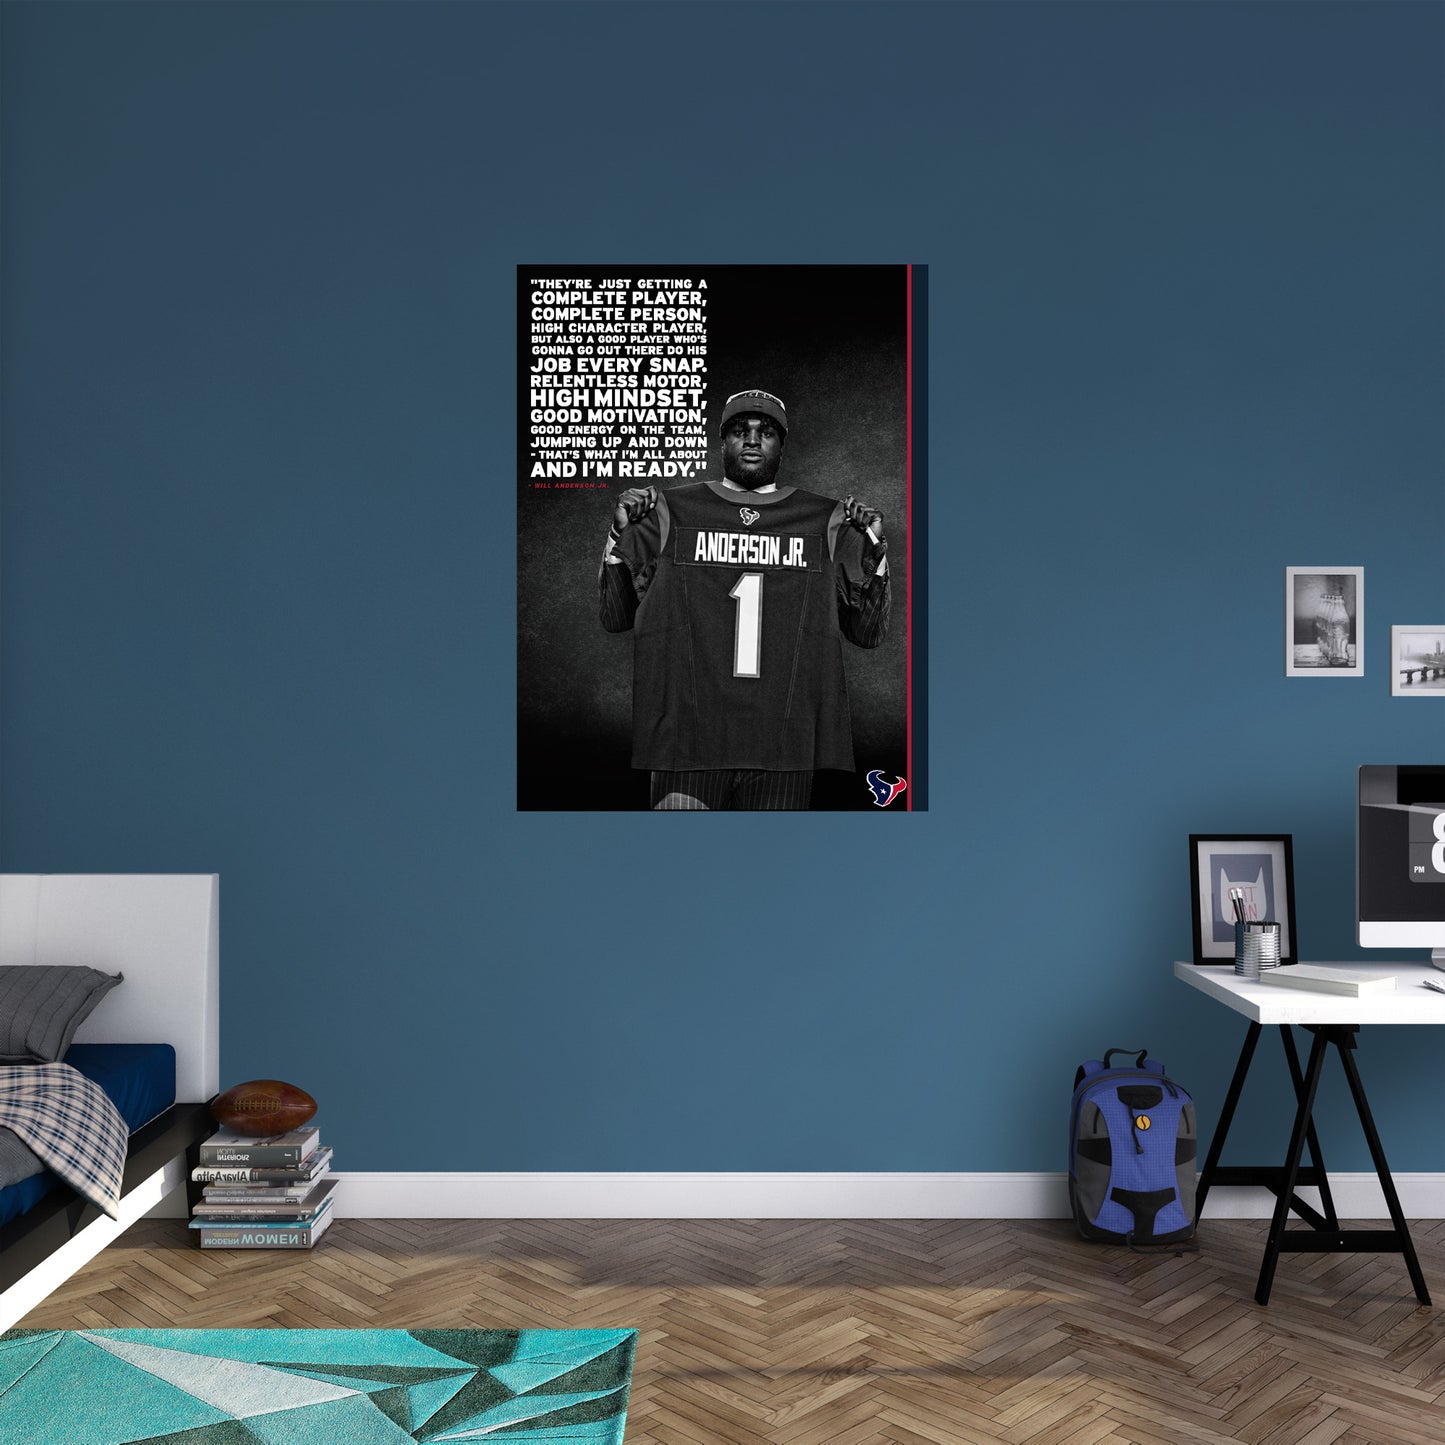 Houston Texans: Will Anderson Jr. 2023 Draft Night Inspirational Poster        - Officially Licensed NFL Removable     Adhesive Decal